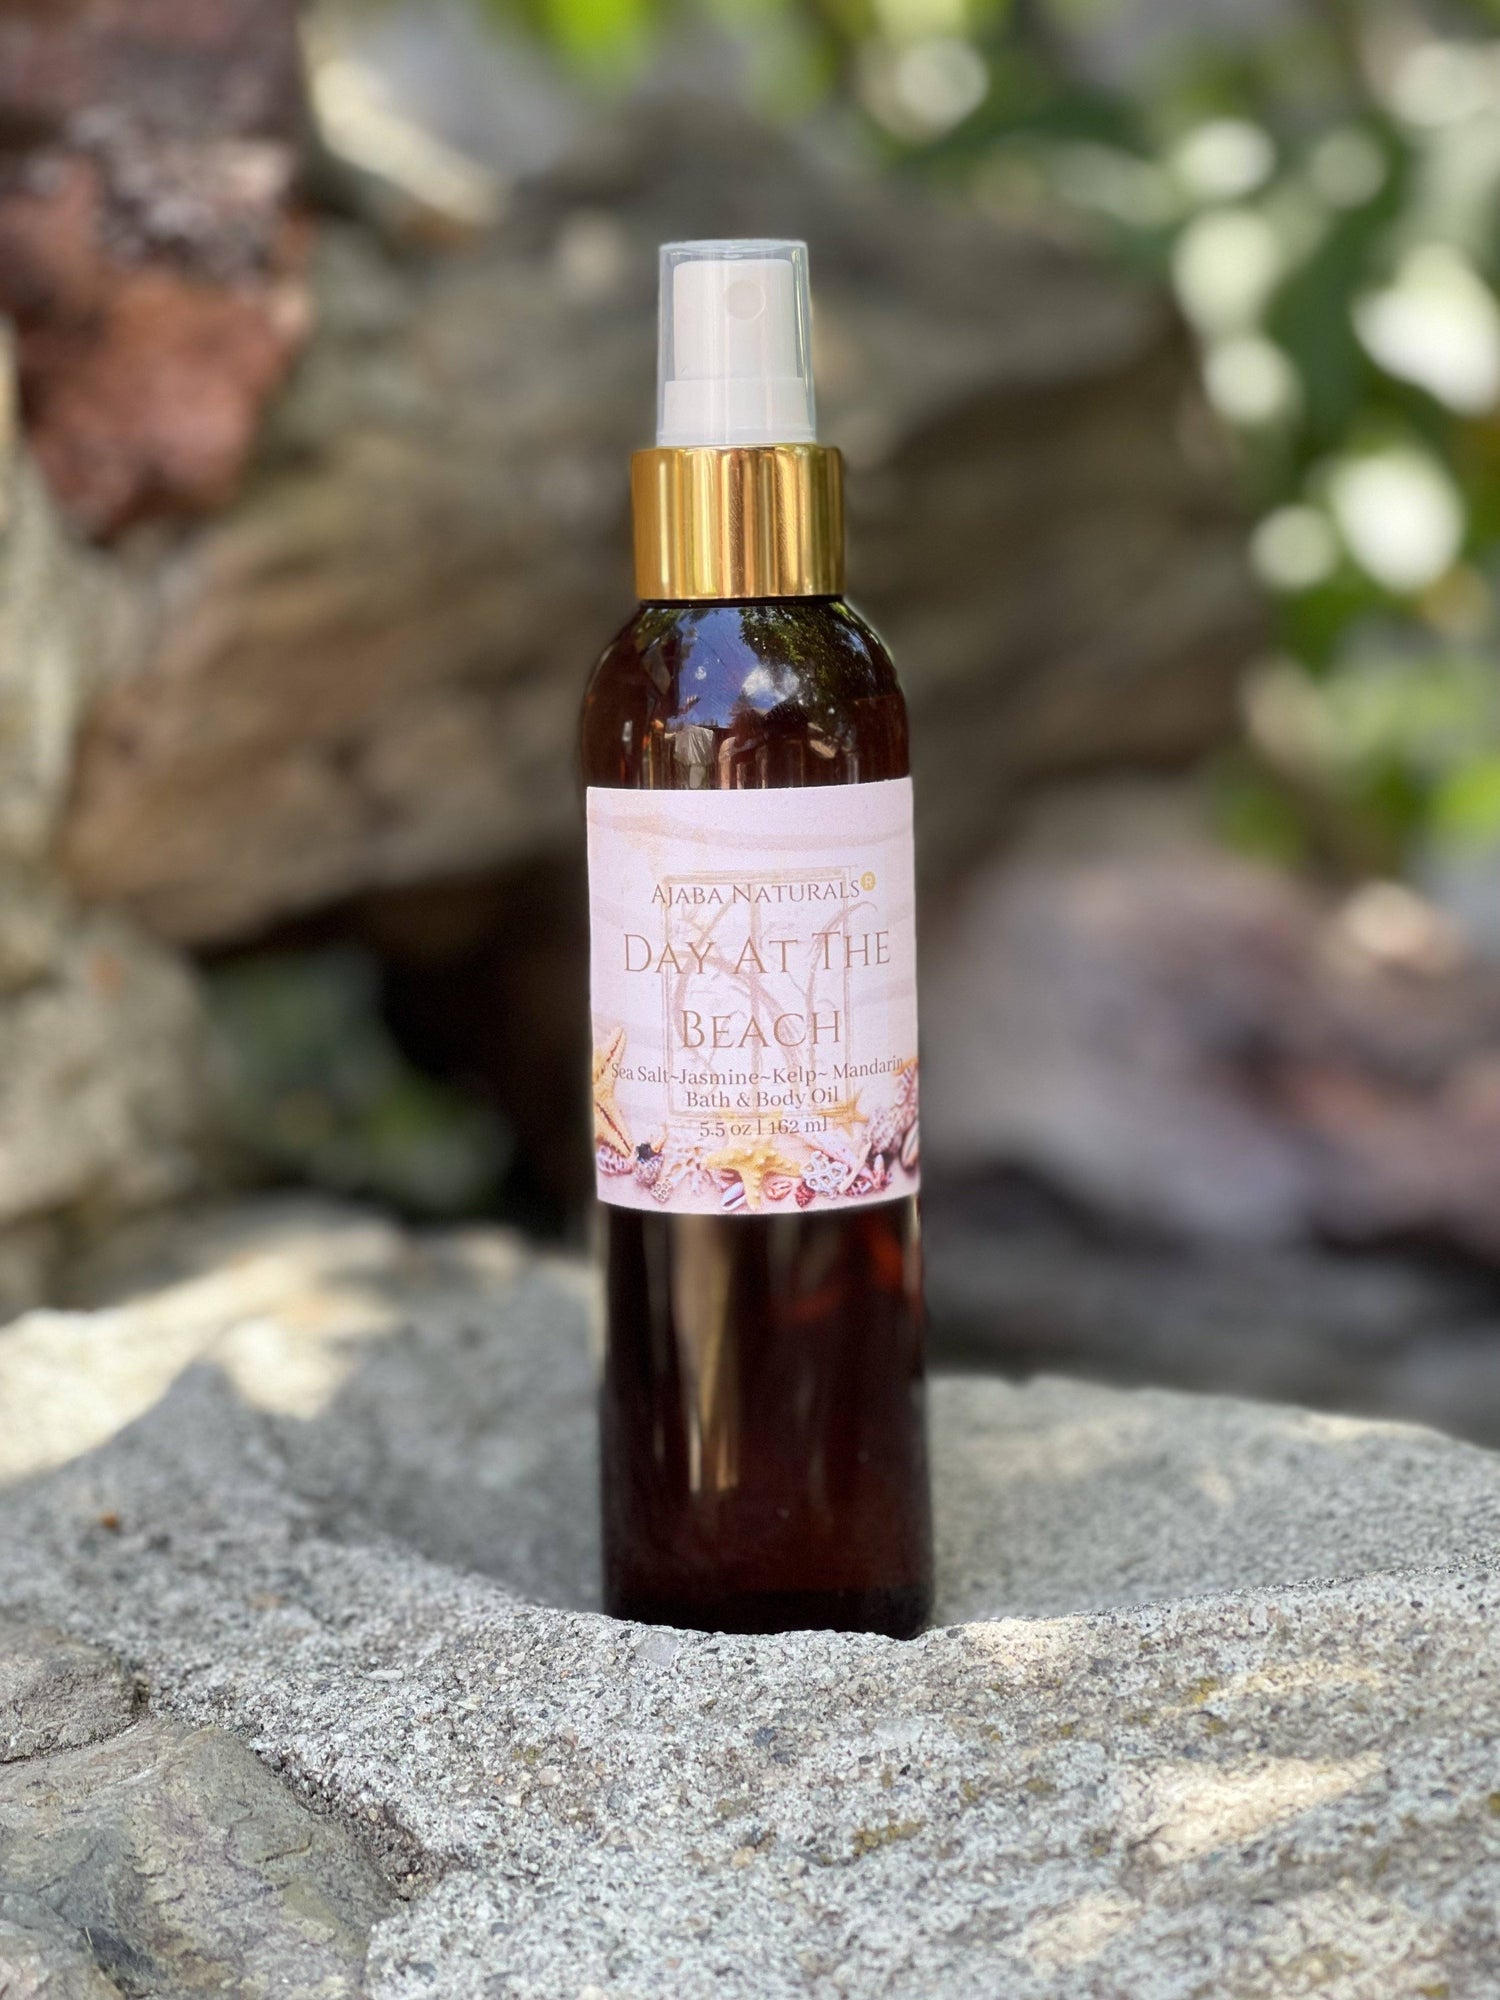 Day at the Beach Bath and Body Oil Body Oil AJABA NATURALS® 